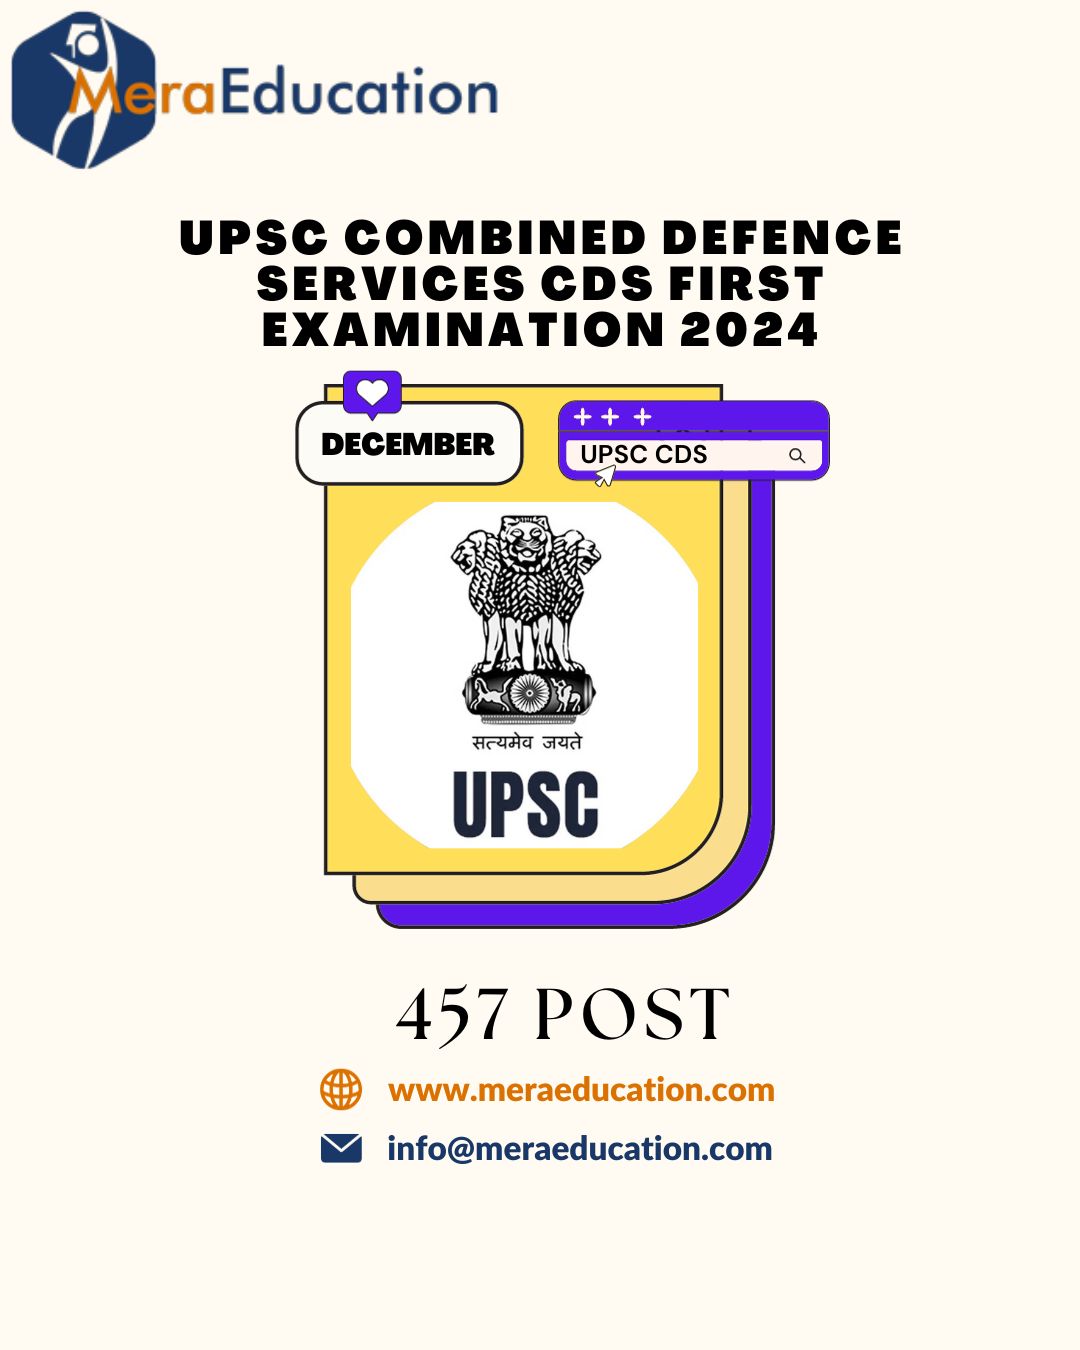 UPSC Combined Defence Services CDS First Examination